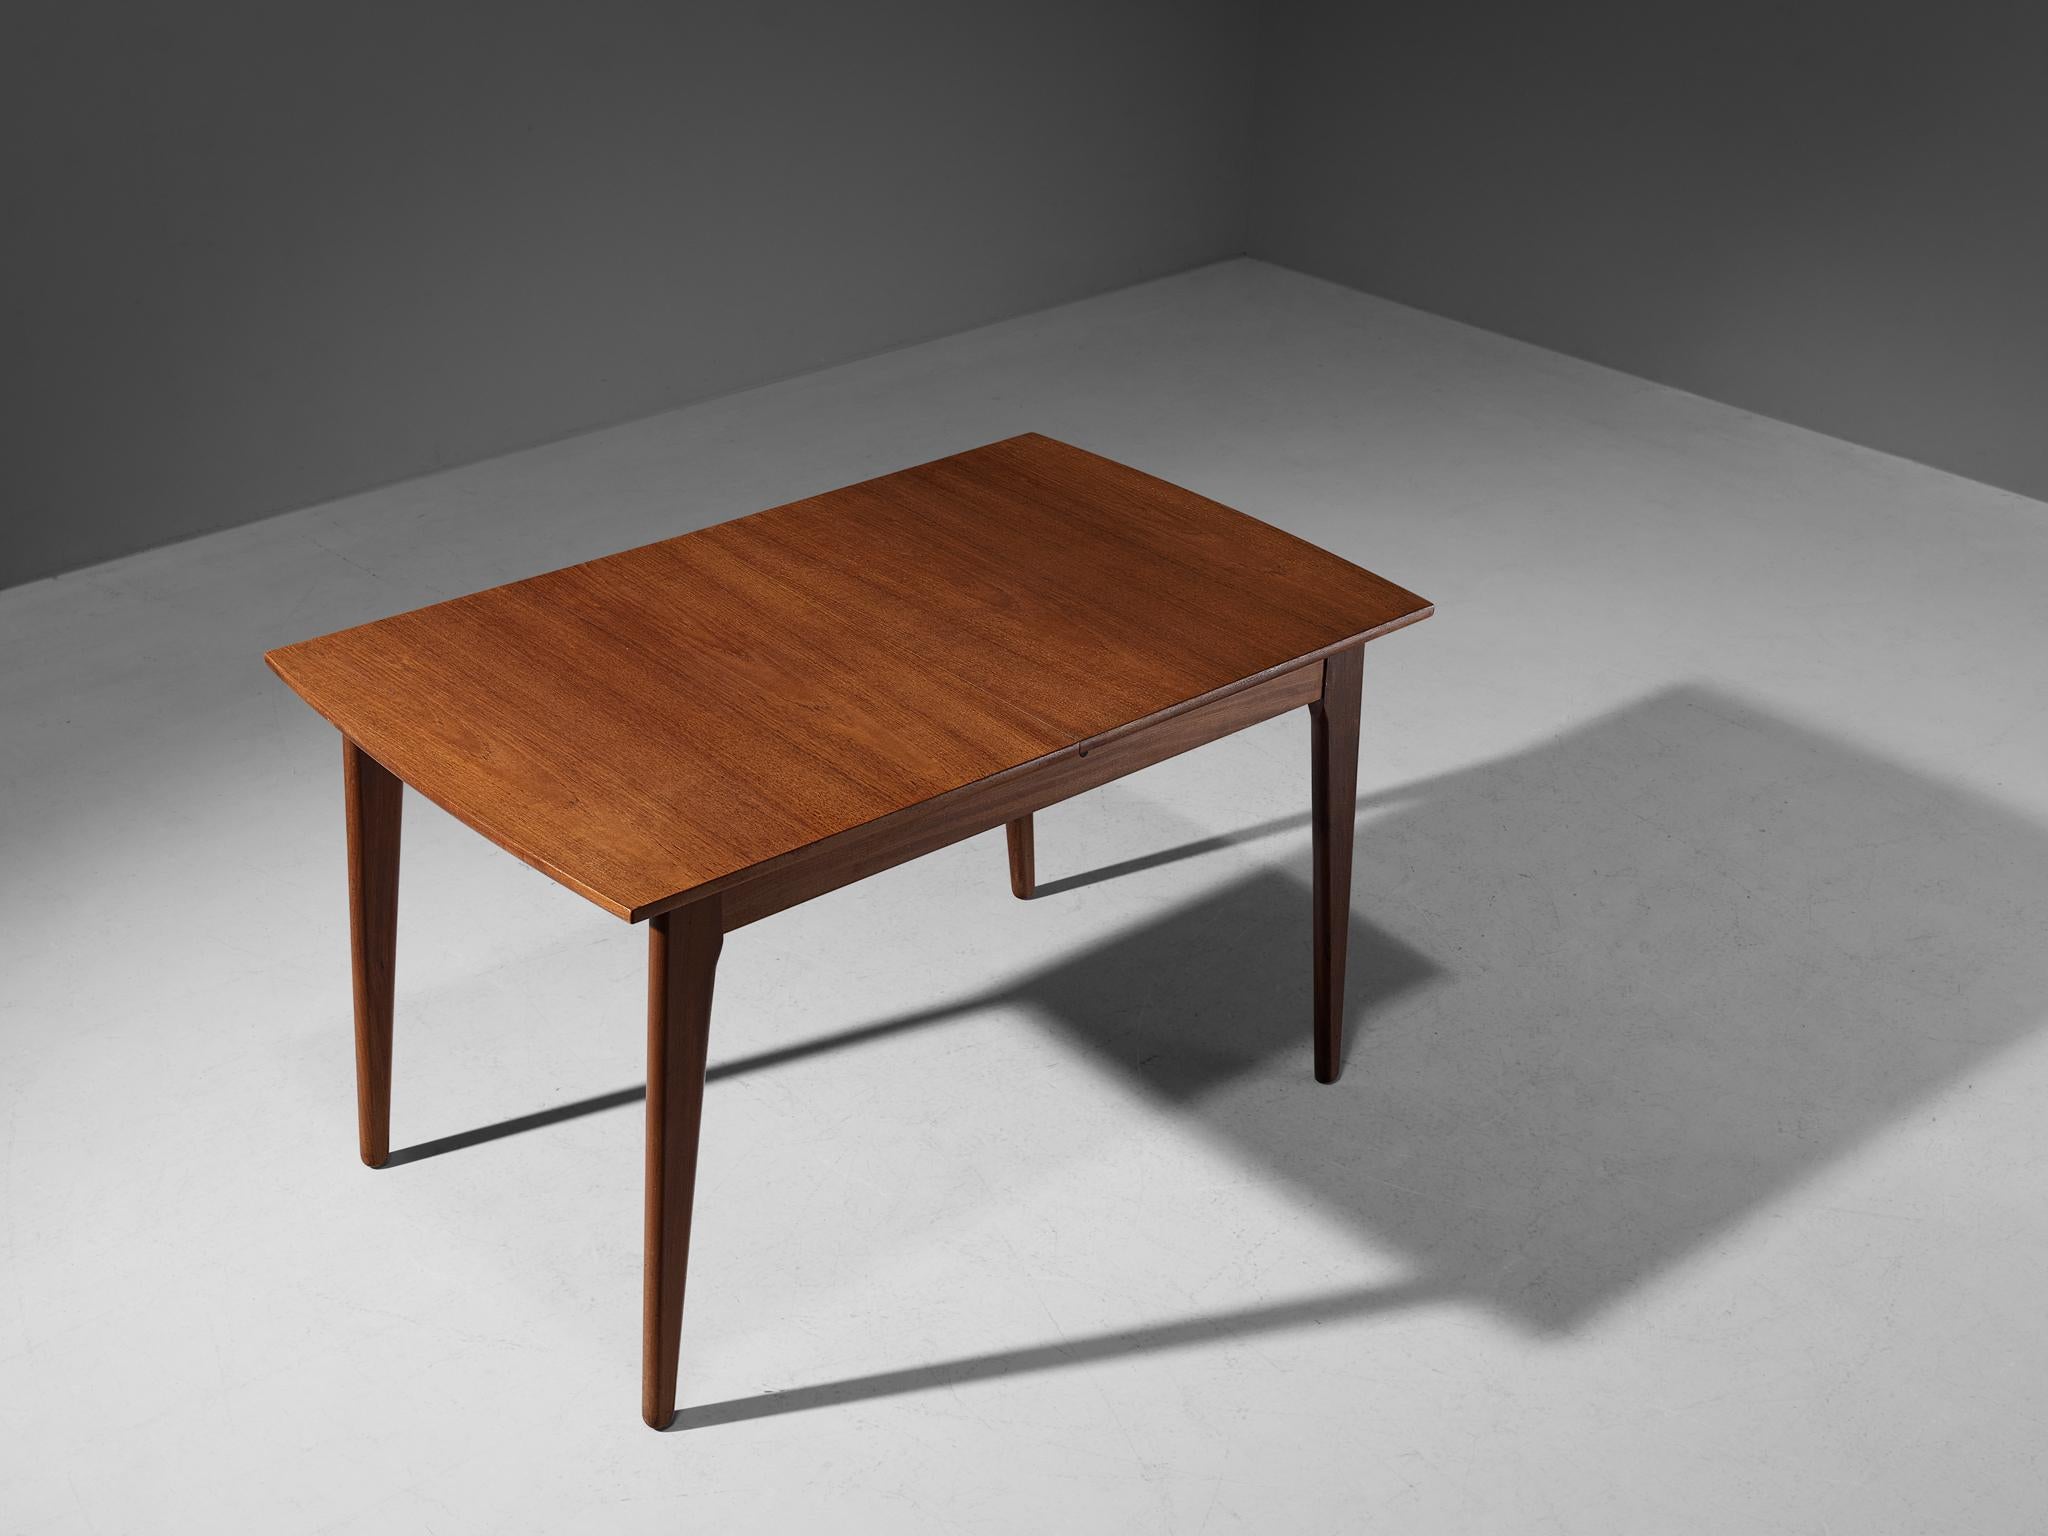 Dining or kitchen table, teak, Denmark, 1950s.

Characteristic Danish extendable dining table executed in teak. This table contains two extra leaf that can be placed in the middle part of the table top. A warm appearance is realized by the vibrant